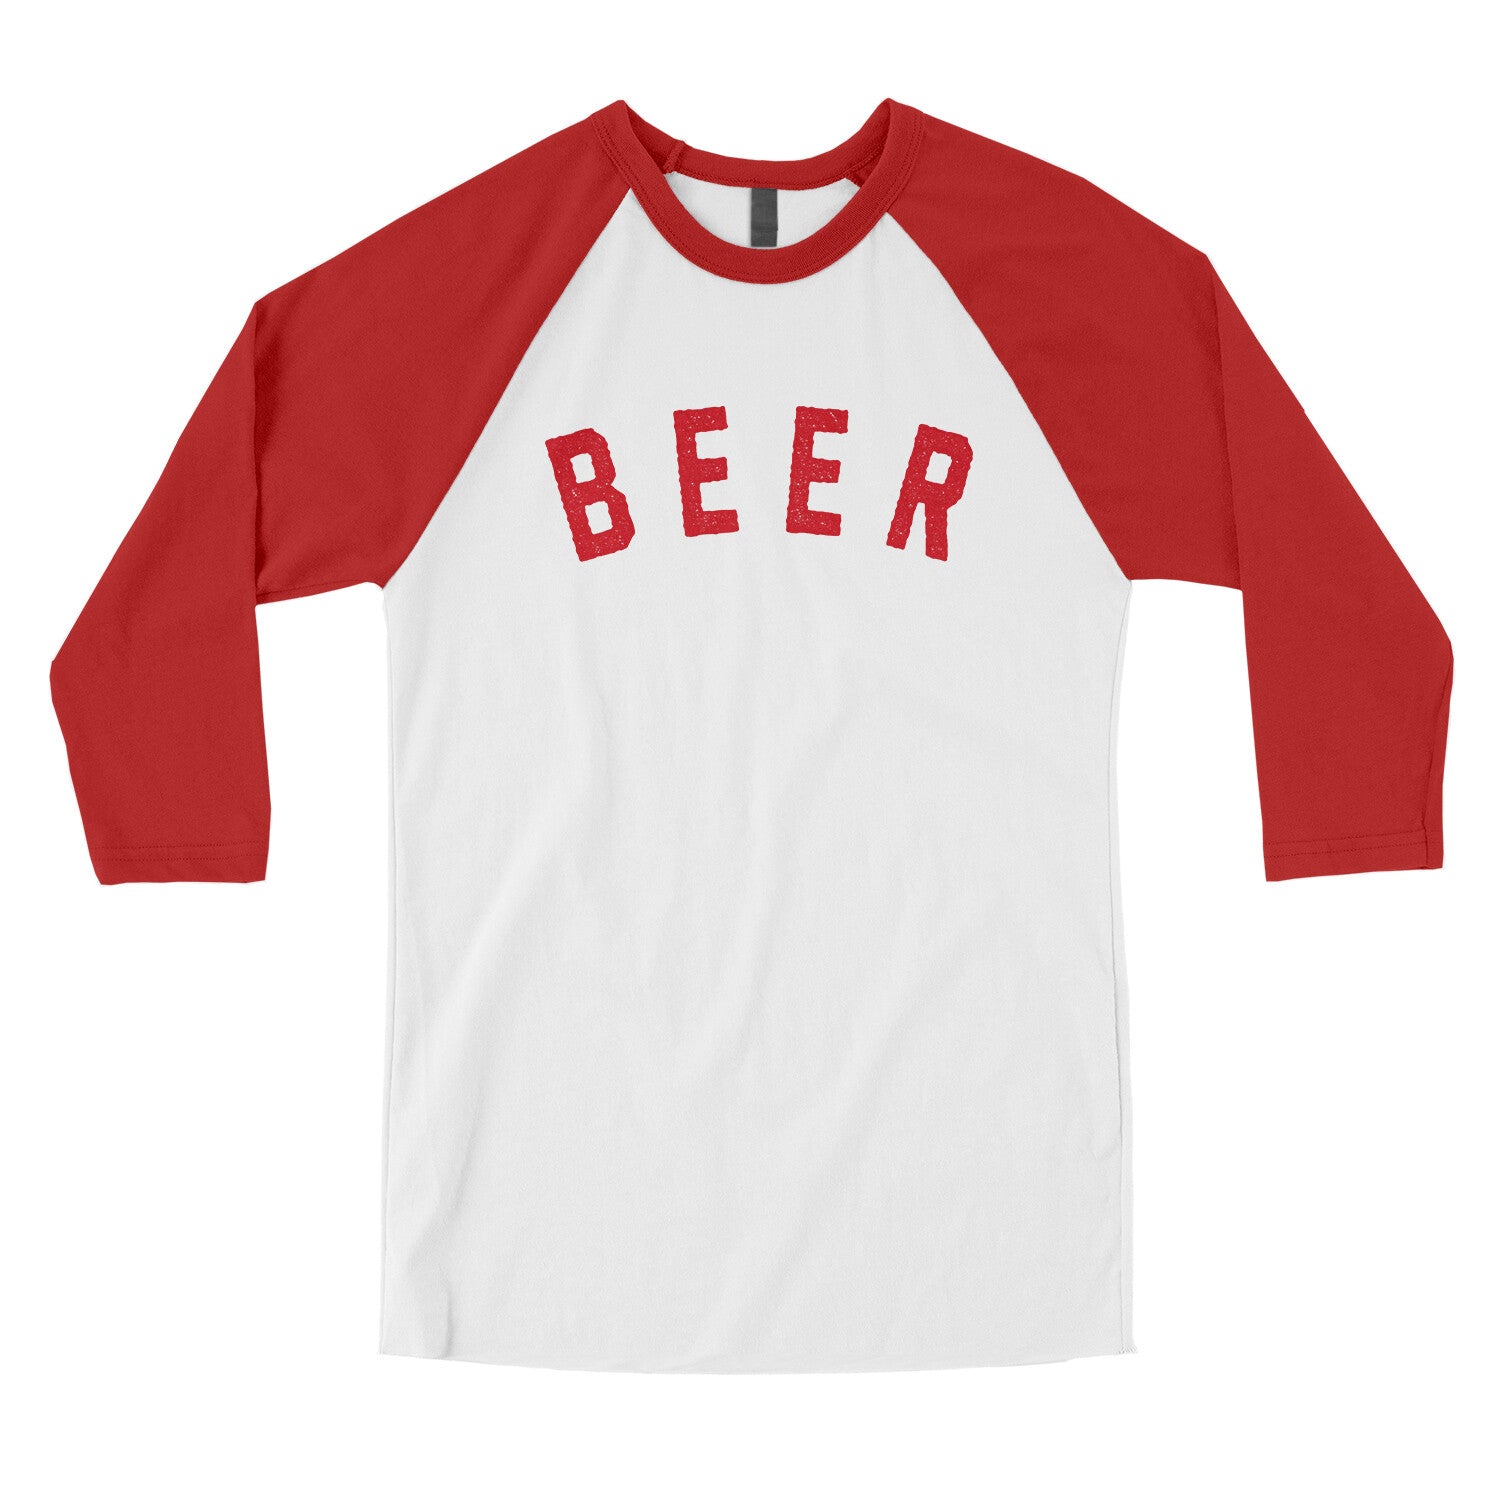 Beer in White with Red Color